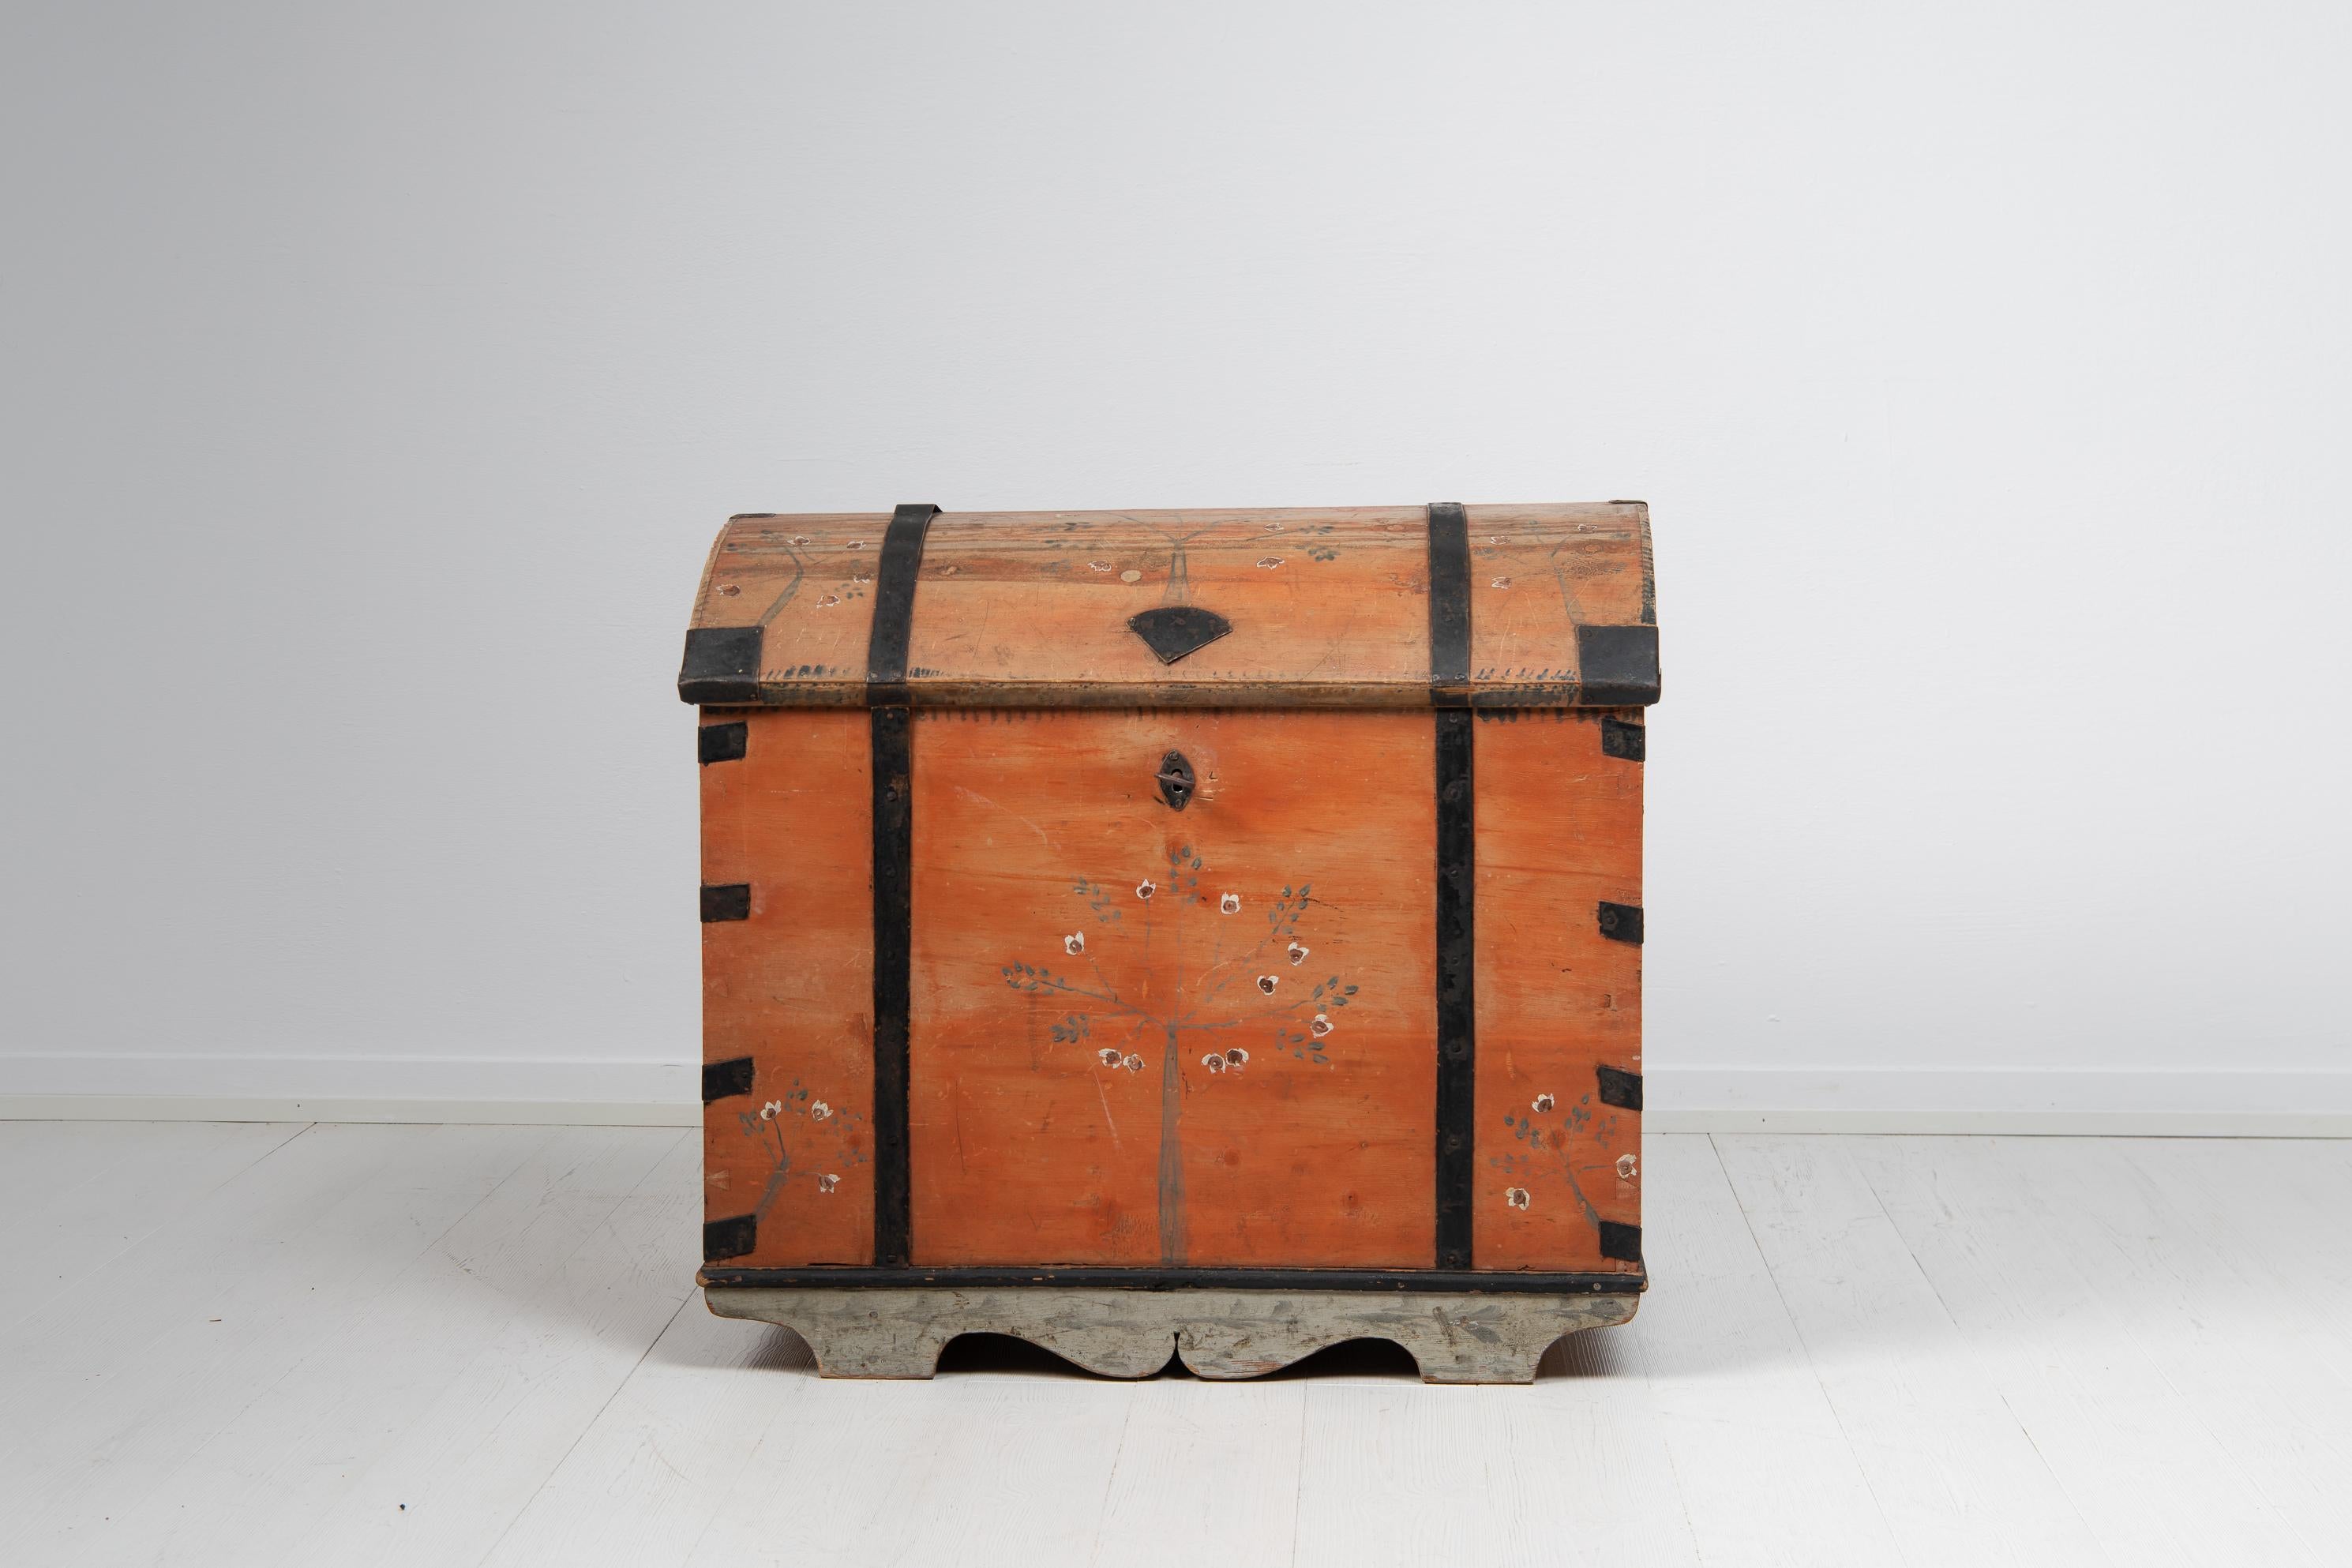 Northern Swedish folk art chest in pine. The chest is made during the early 19th century, around 1820, completely by hand. It has its original paint with a hand painted floral decor. The lock and key are also wrought by hand and are in working